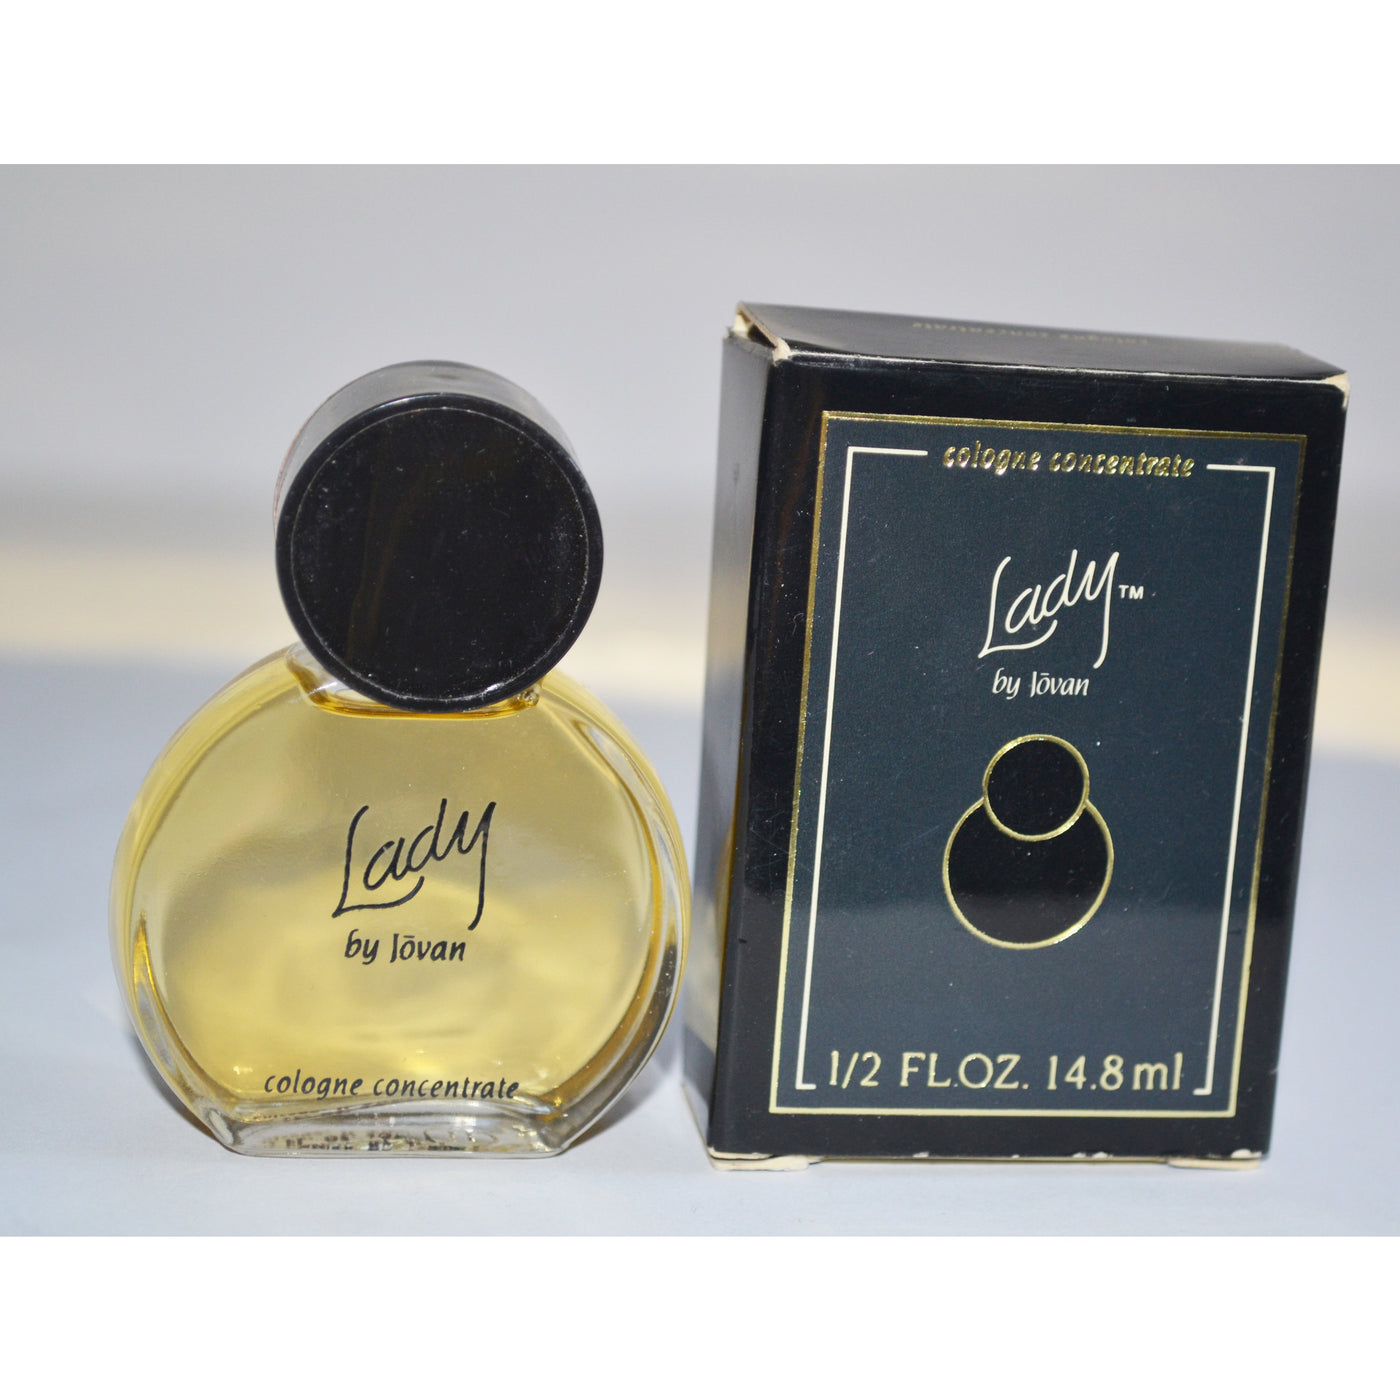 Vintage Lady Cologne Concentrate Mini By Jovan